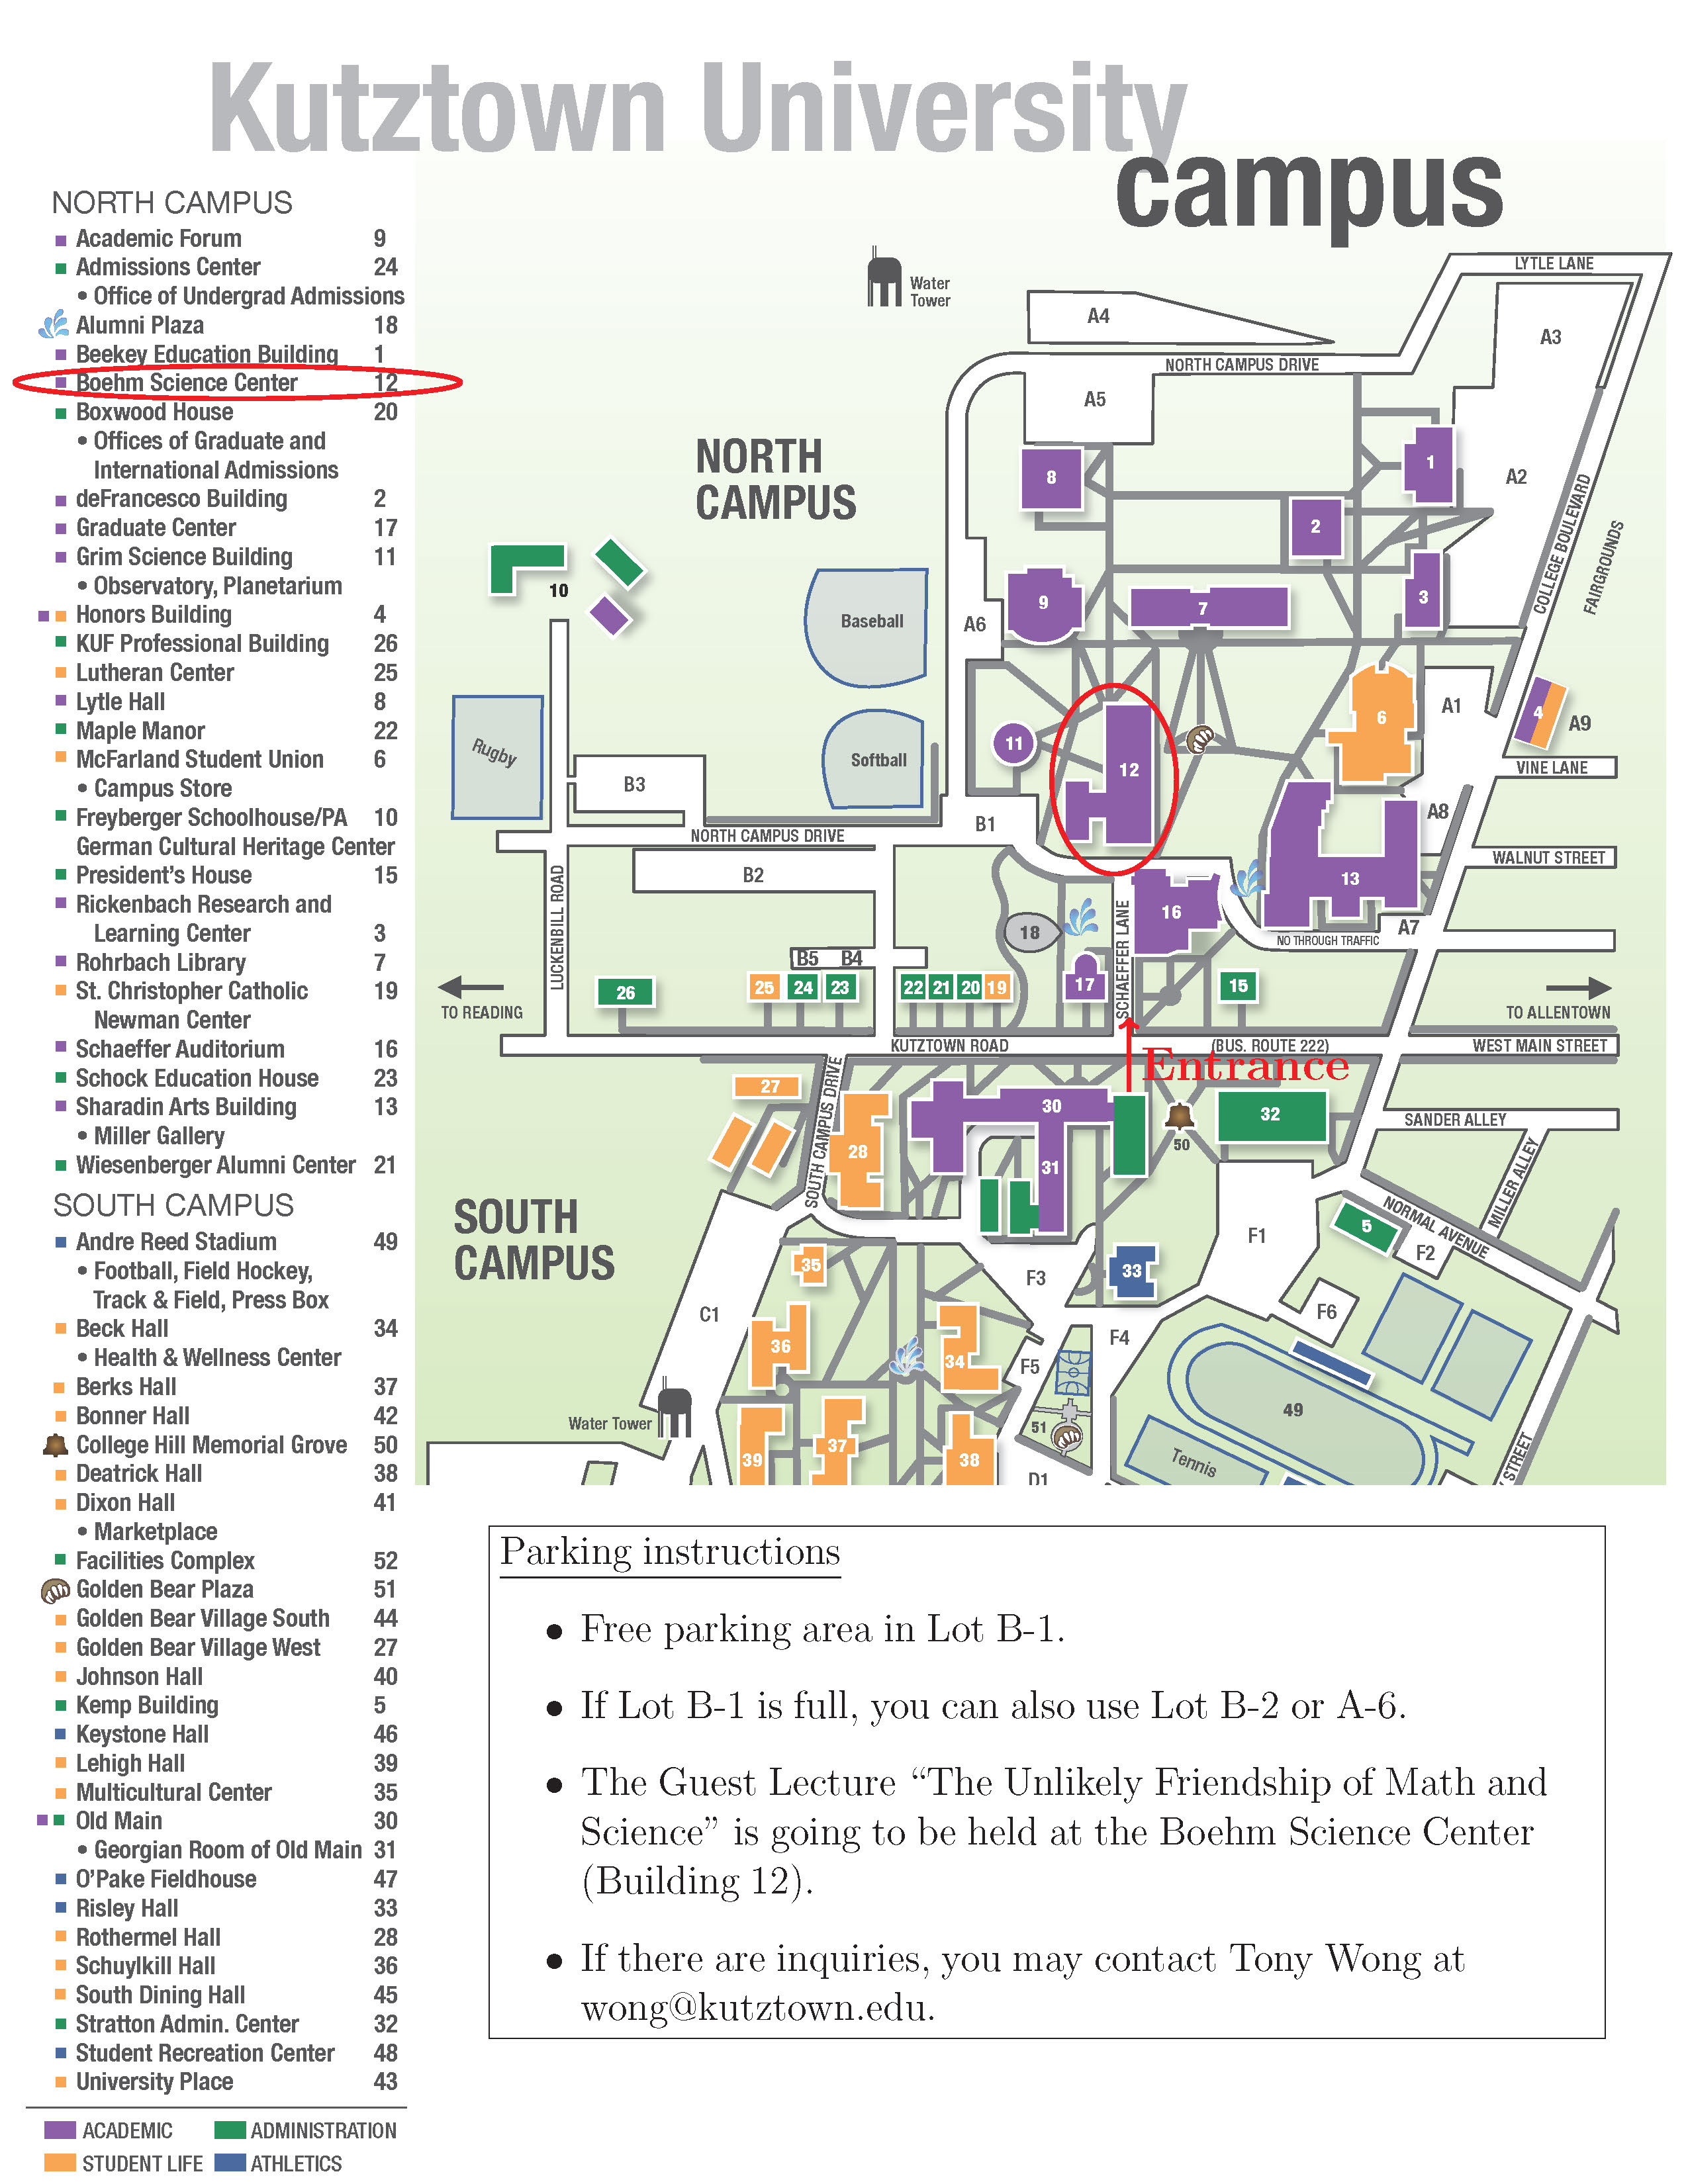 University map with Boehm Science Center circled